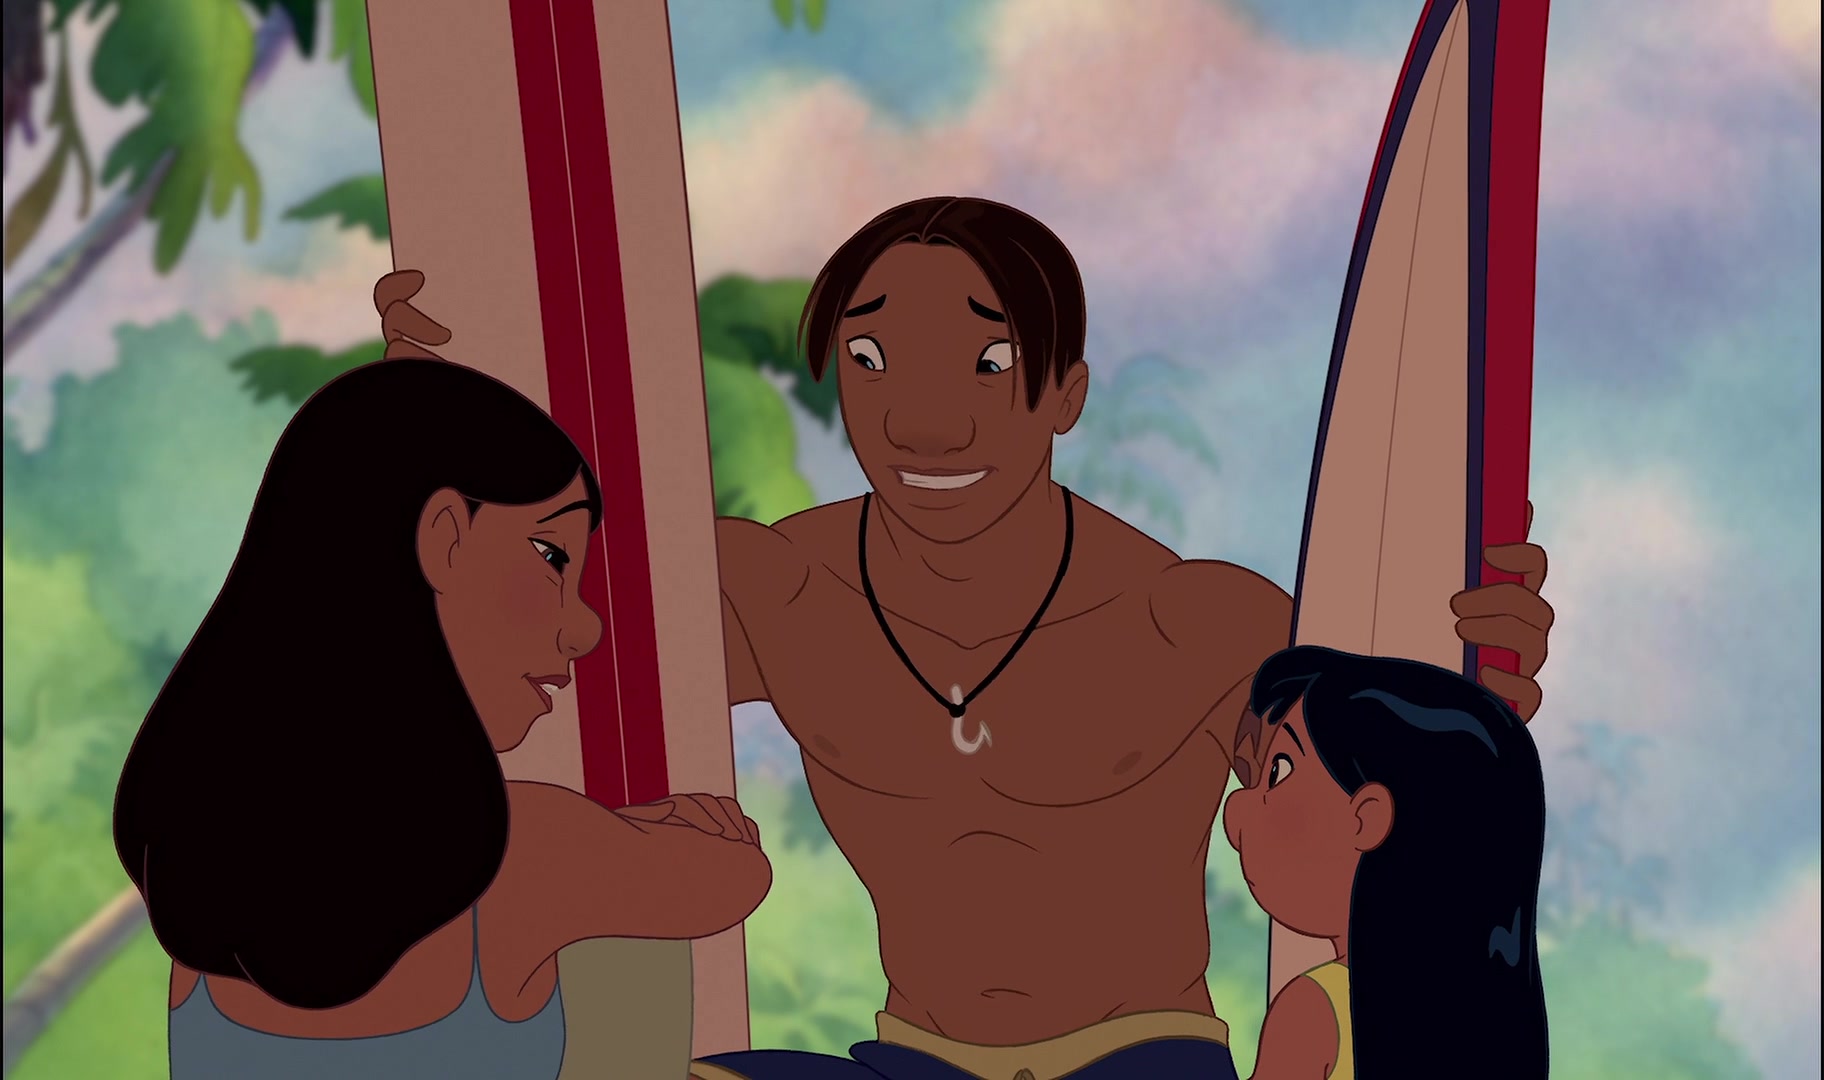 David Kawena (Jason Scott Lee) attempts to convince Nani (Tia Carrere) and Lilol (Daveigh Chase) to catch some waves in Lilo & Stitch (2002), Walt Disney Studios